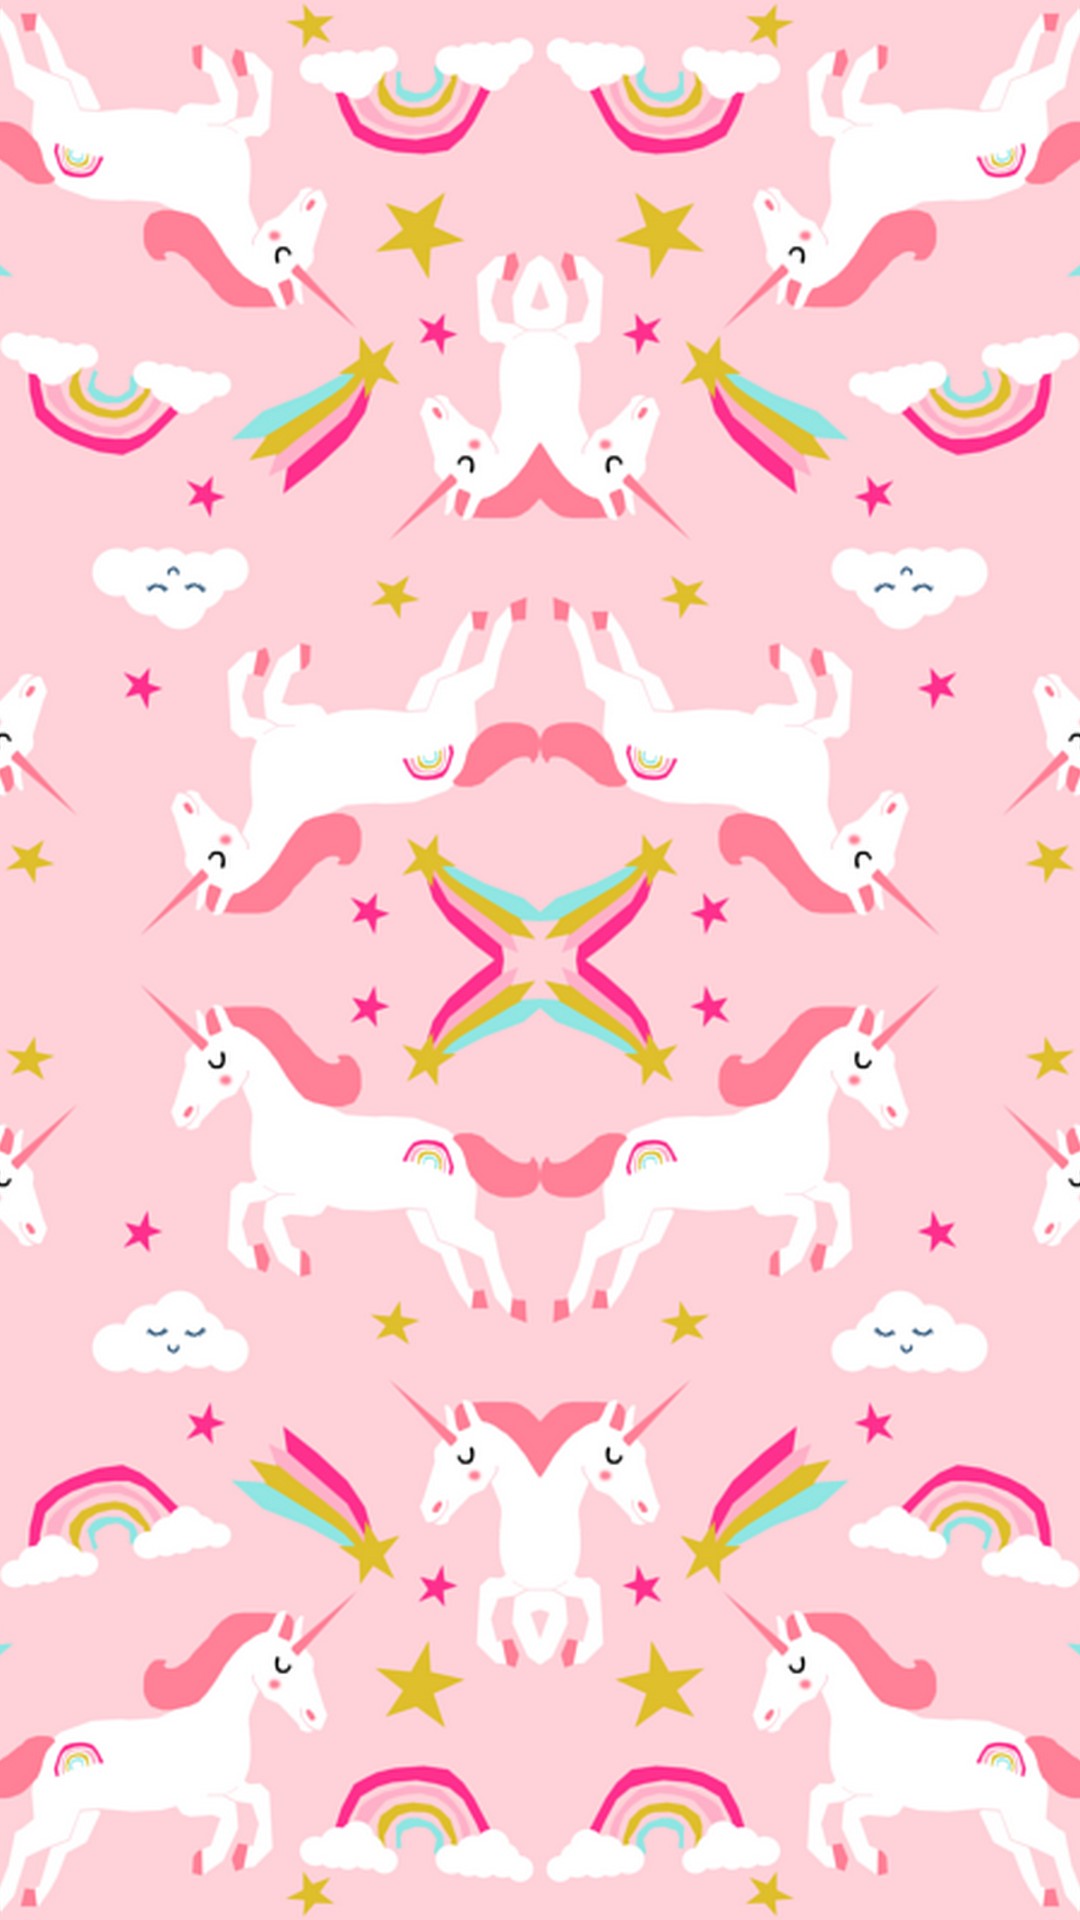 Cute Unicorn Wallpaper for Phones with high-resolution 1080x1920 pixel. Download all Mobile Wallpapers and Use them as wallpapers for your iPhone, Tablet, iPad, Android and other mobile devices